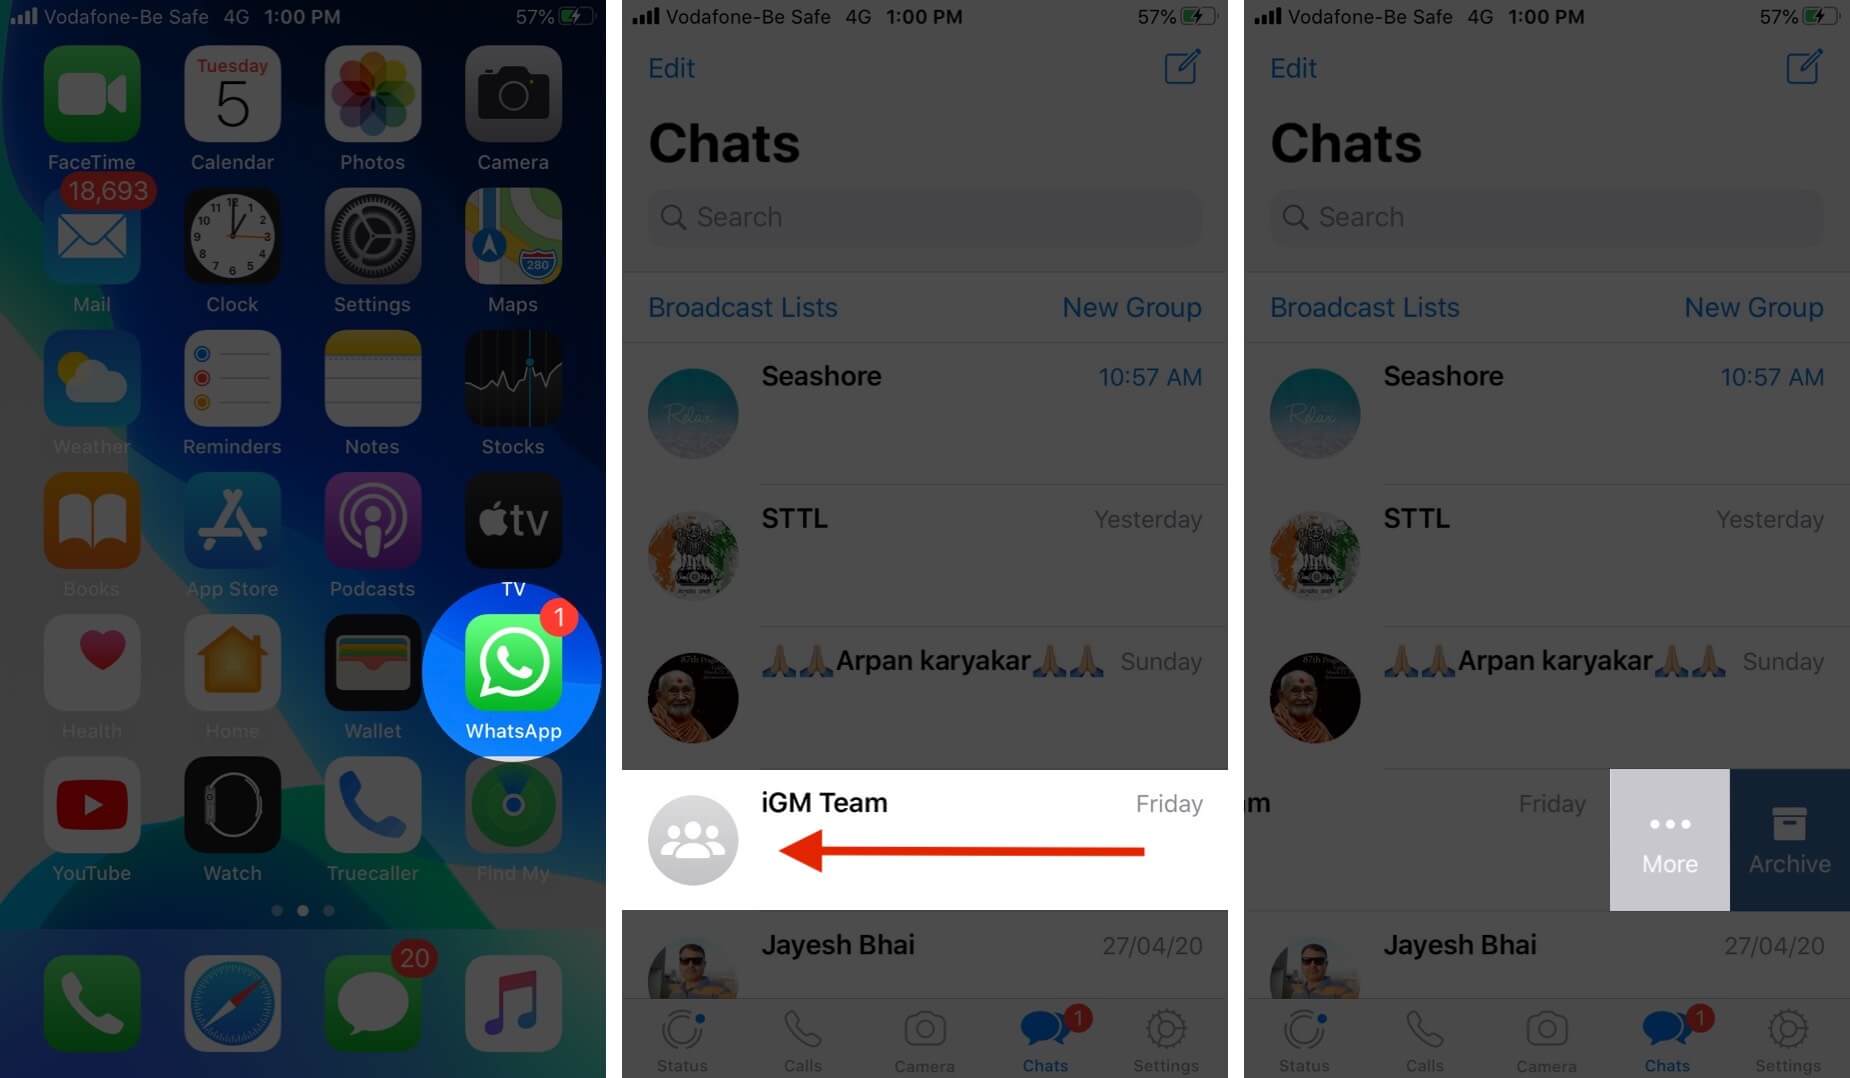 Open WhatsApp Swipe Group and Tap on More